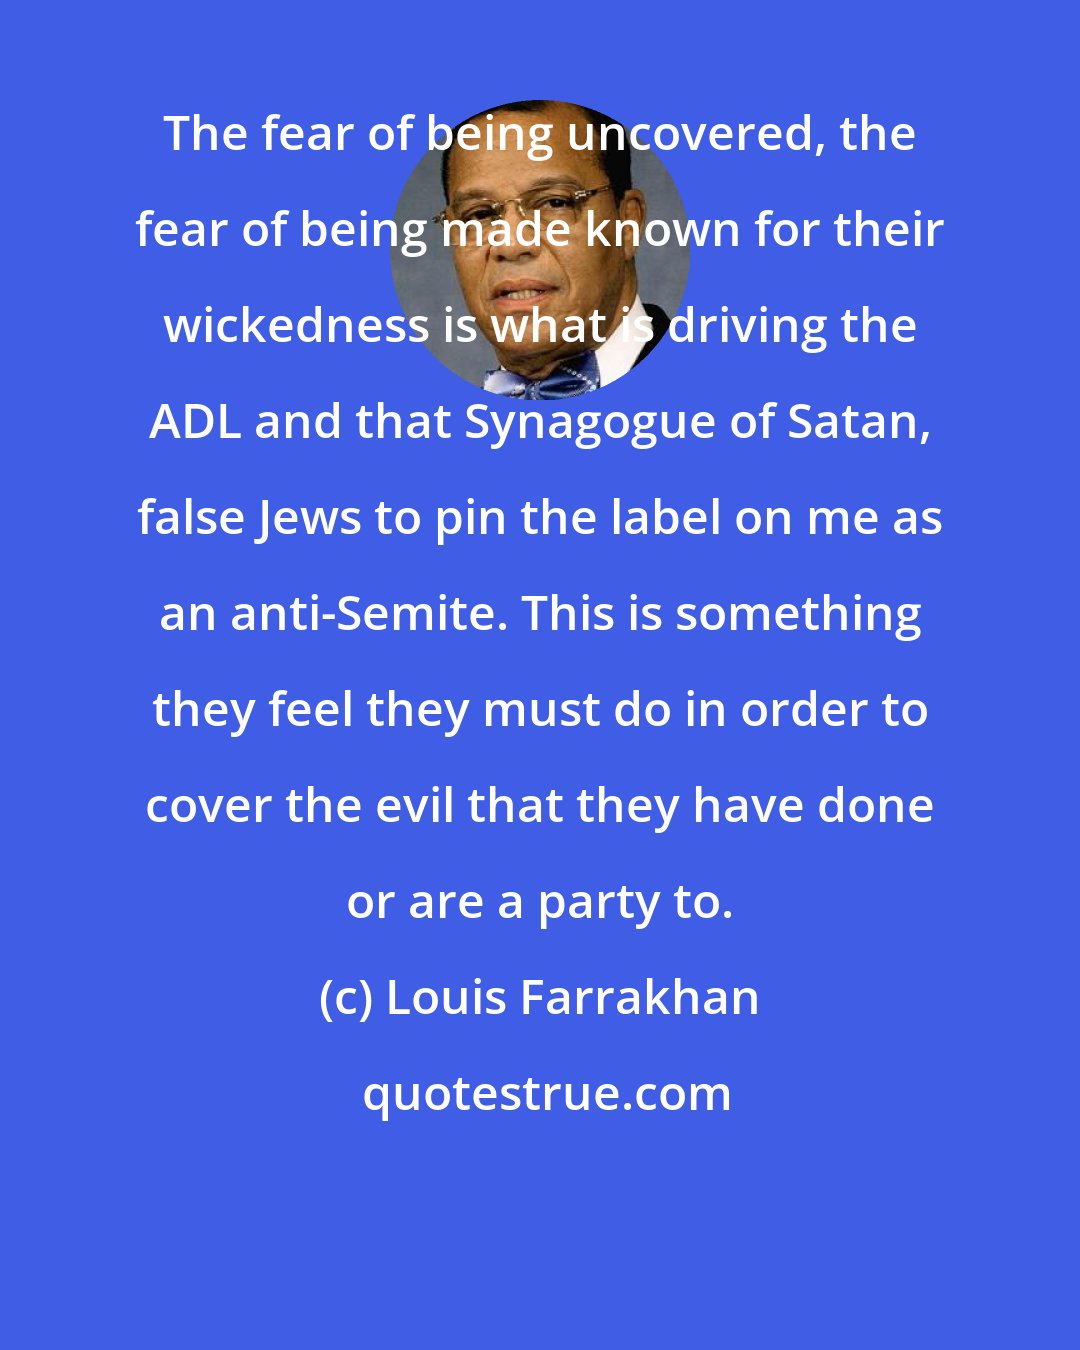 Louis Farrakhan: The fear of being uncovered, the fear of being made known for their wickedness is what is driving the ADL and that Synagogue of Satan, false Jews to pin the label on me as an anti-Semite. This is something they feel they must do in order to cover the evil that they have done or are a party to.